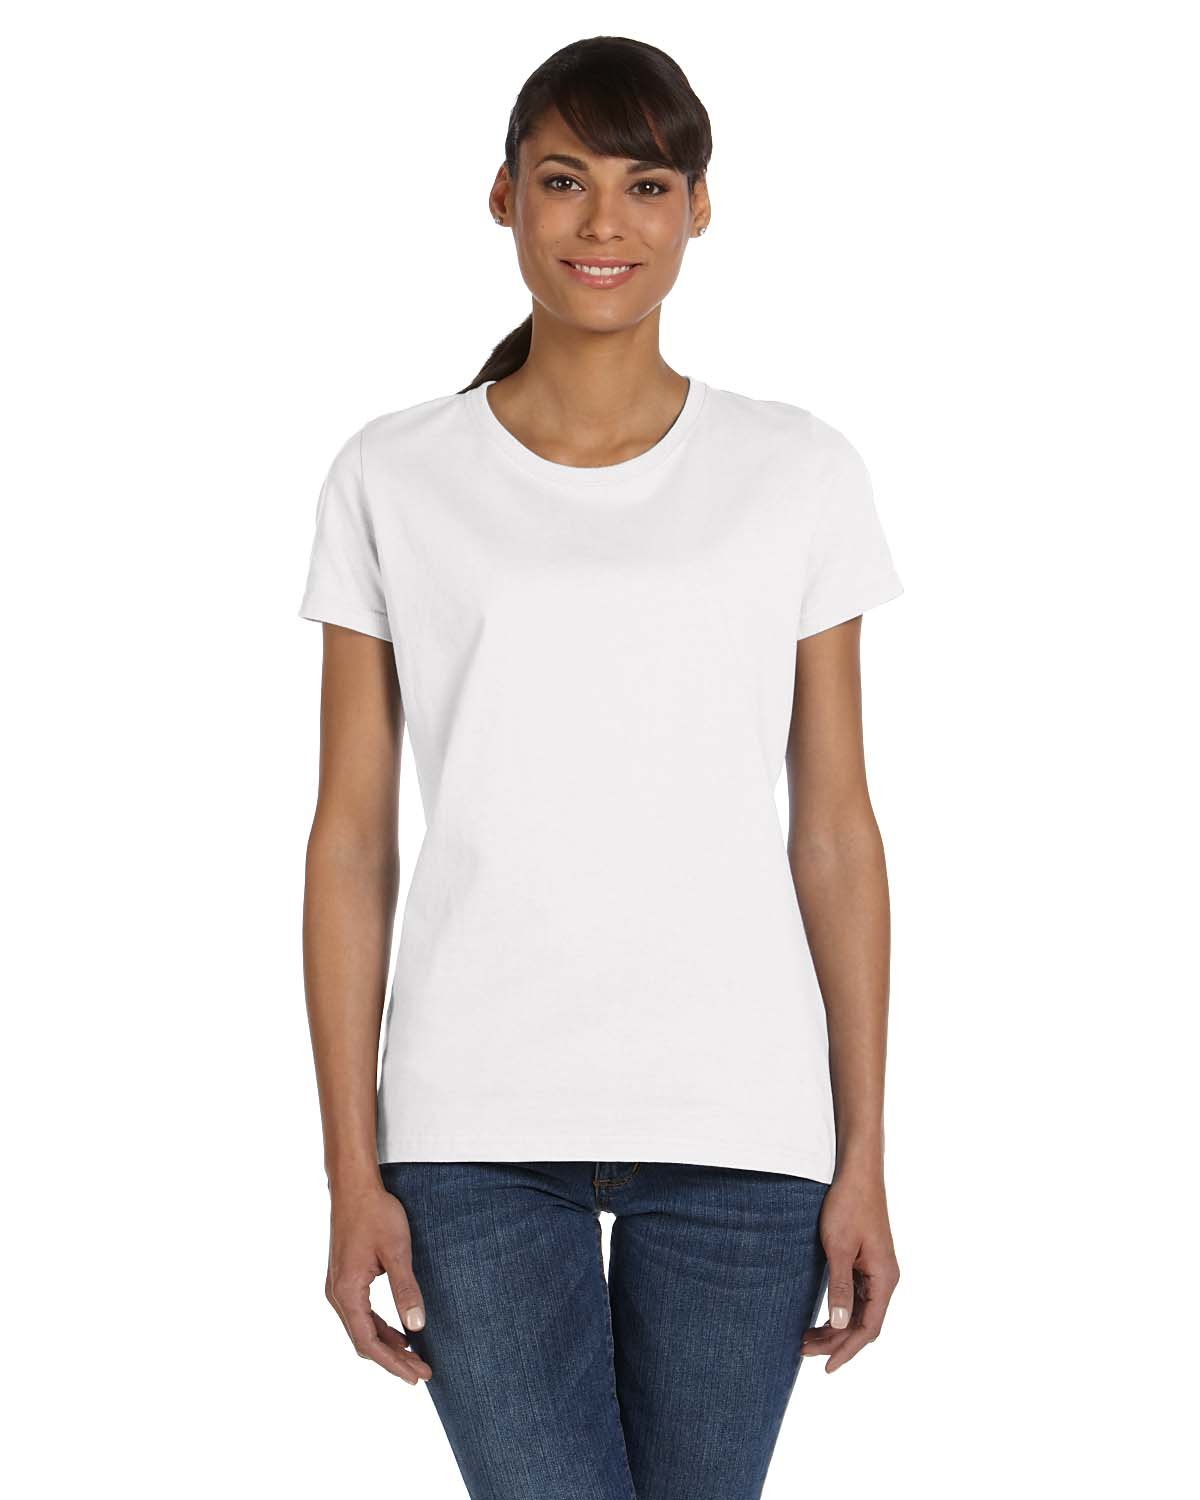 Picture of Fruit of the Loom HD Cotton Ladies' T-Shirt